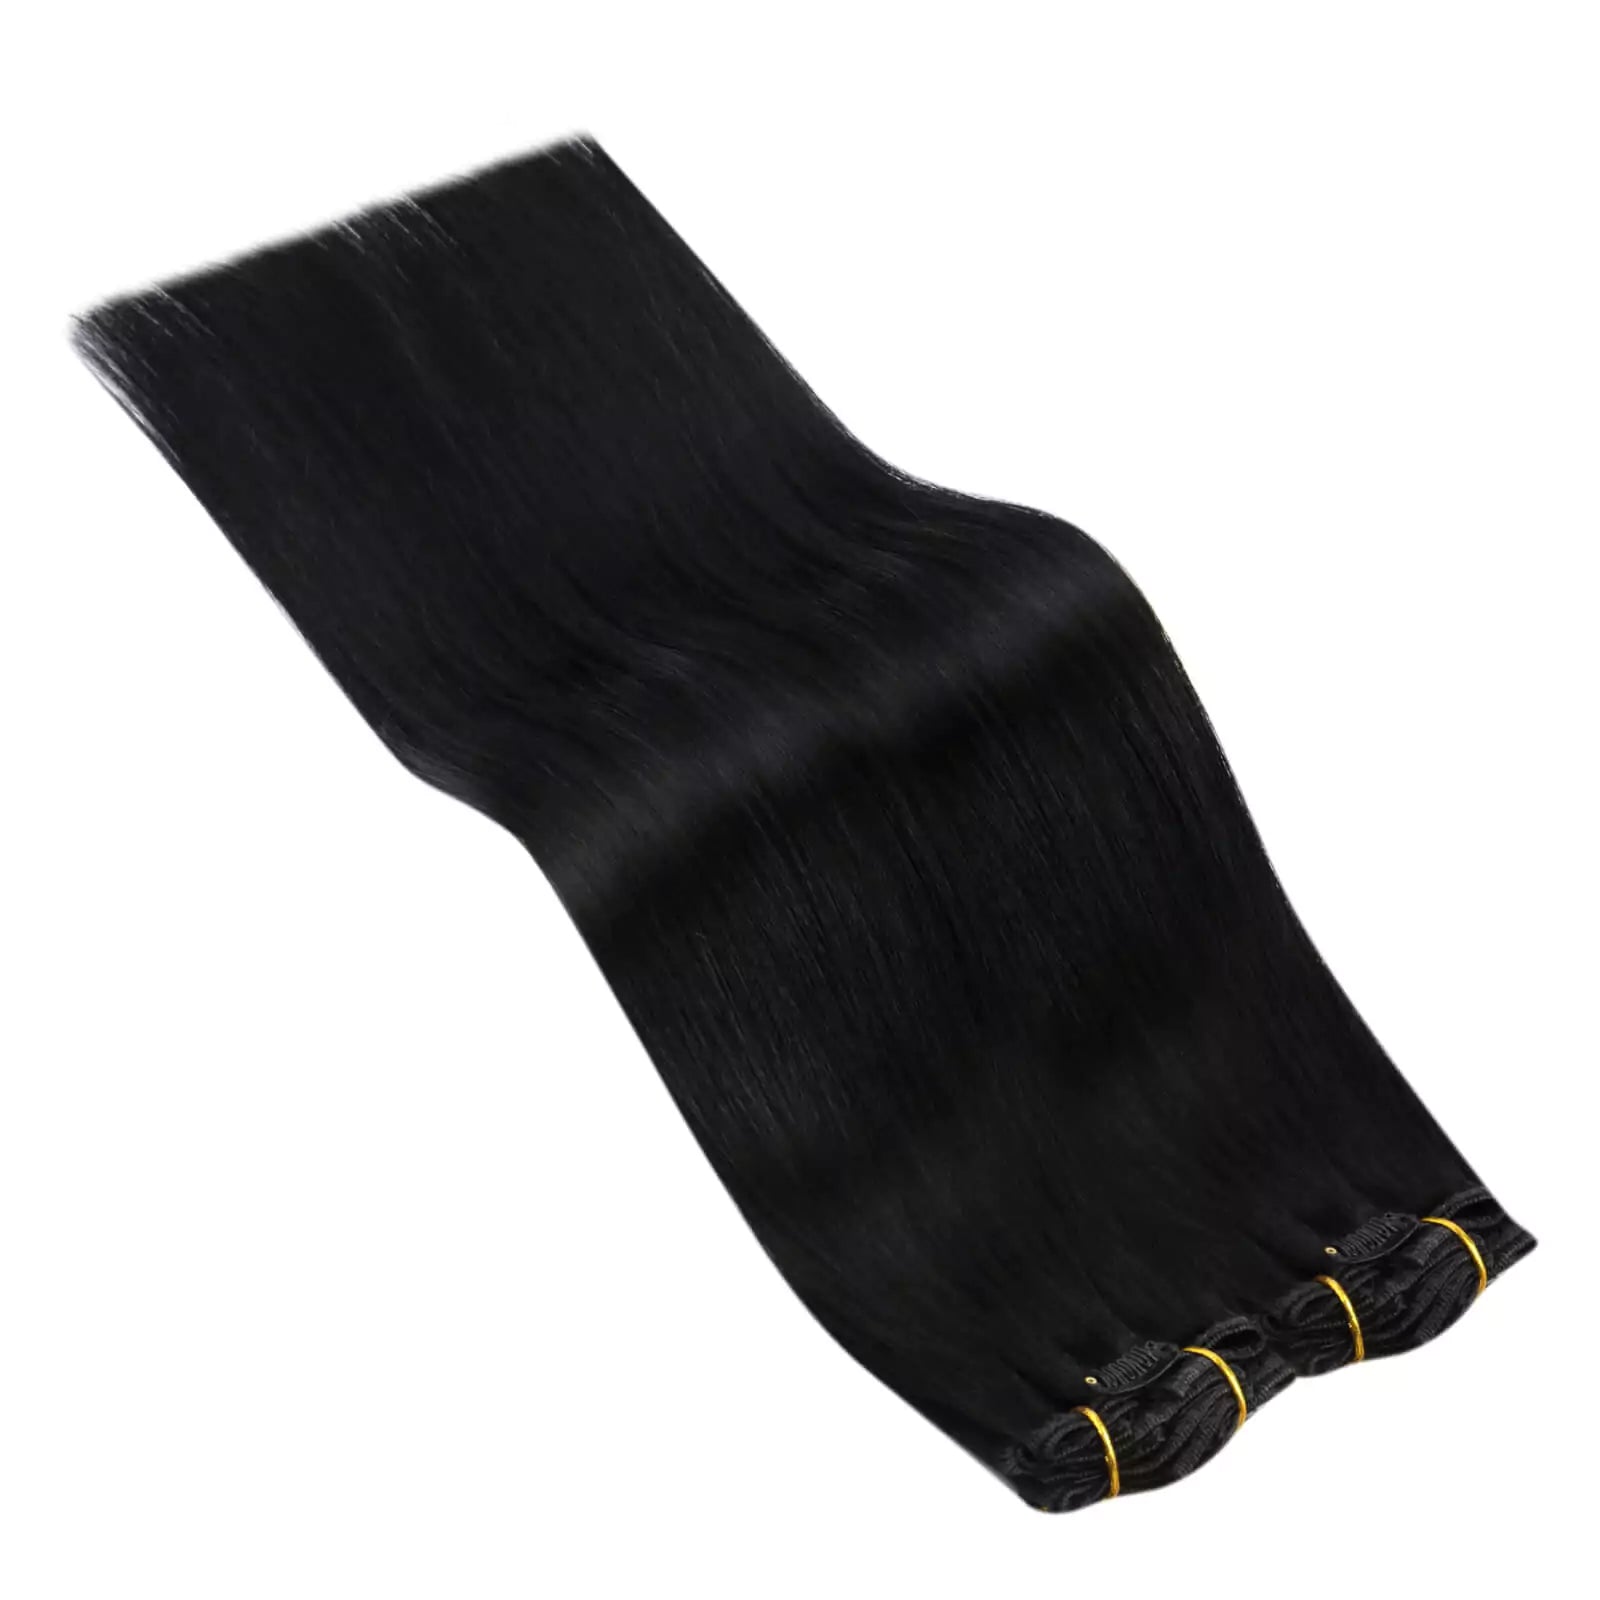 Black Hair Extensions Human Hair Clip in Extensions